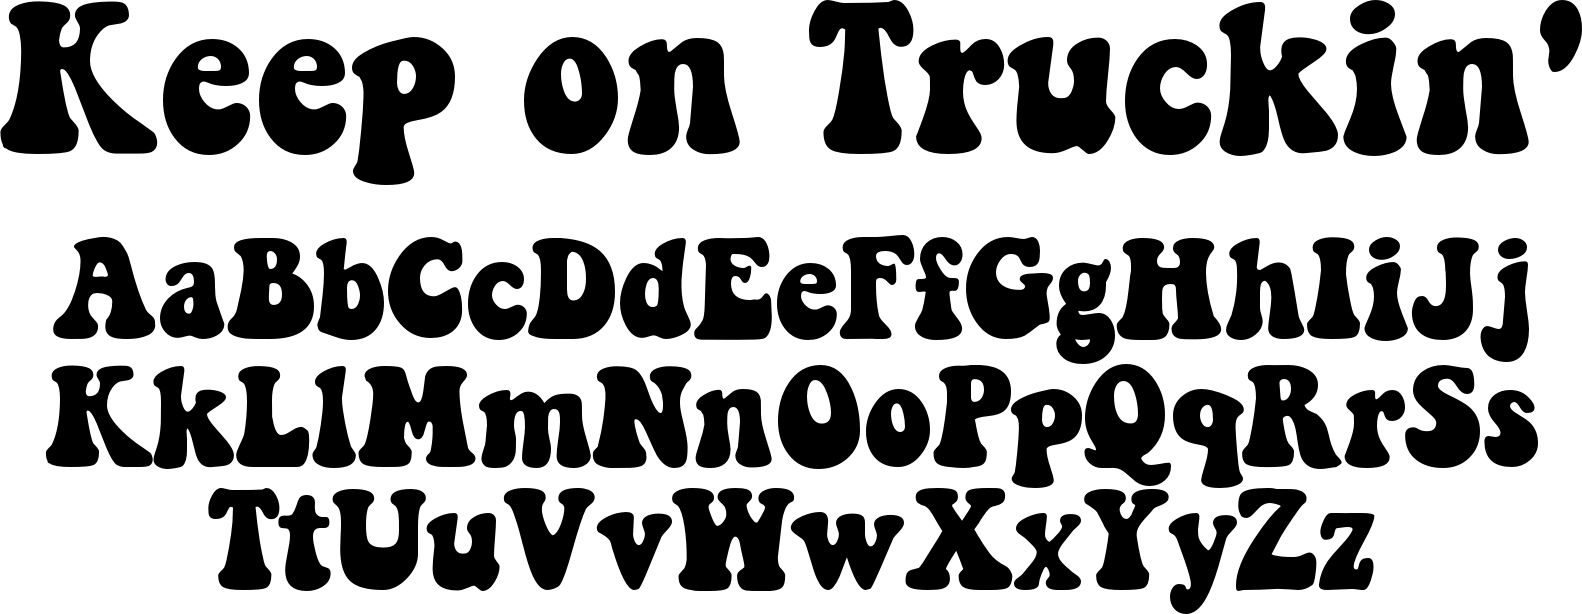 Keep on Truckin Font by Brain Eaters Font Co Font Bros